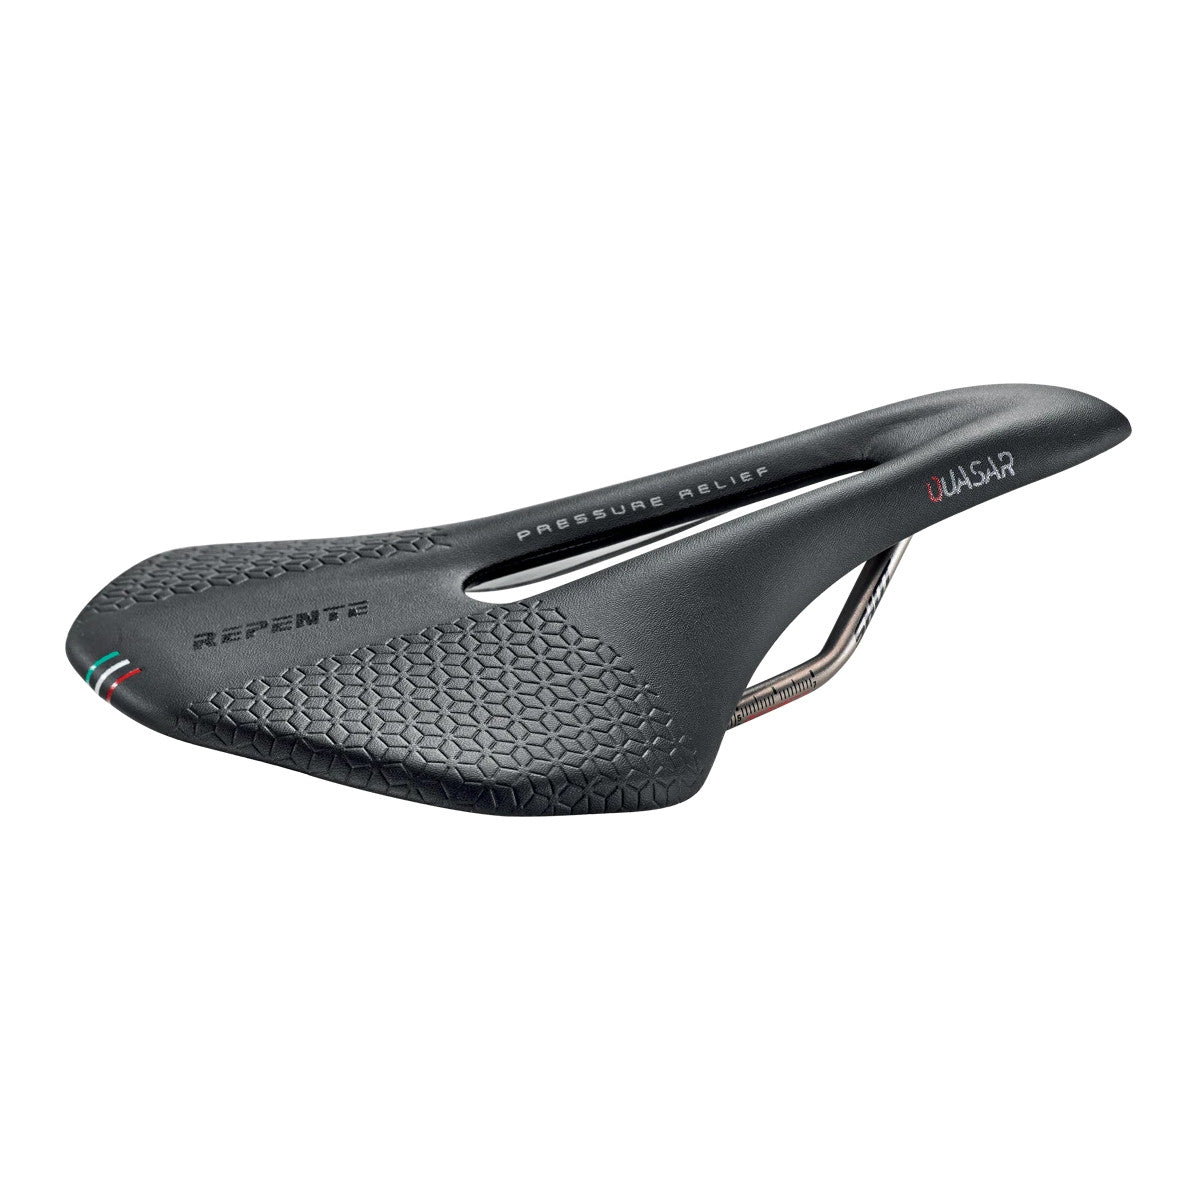 Repente Quasar Road Saddle Stainless Steel